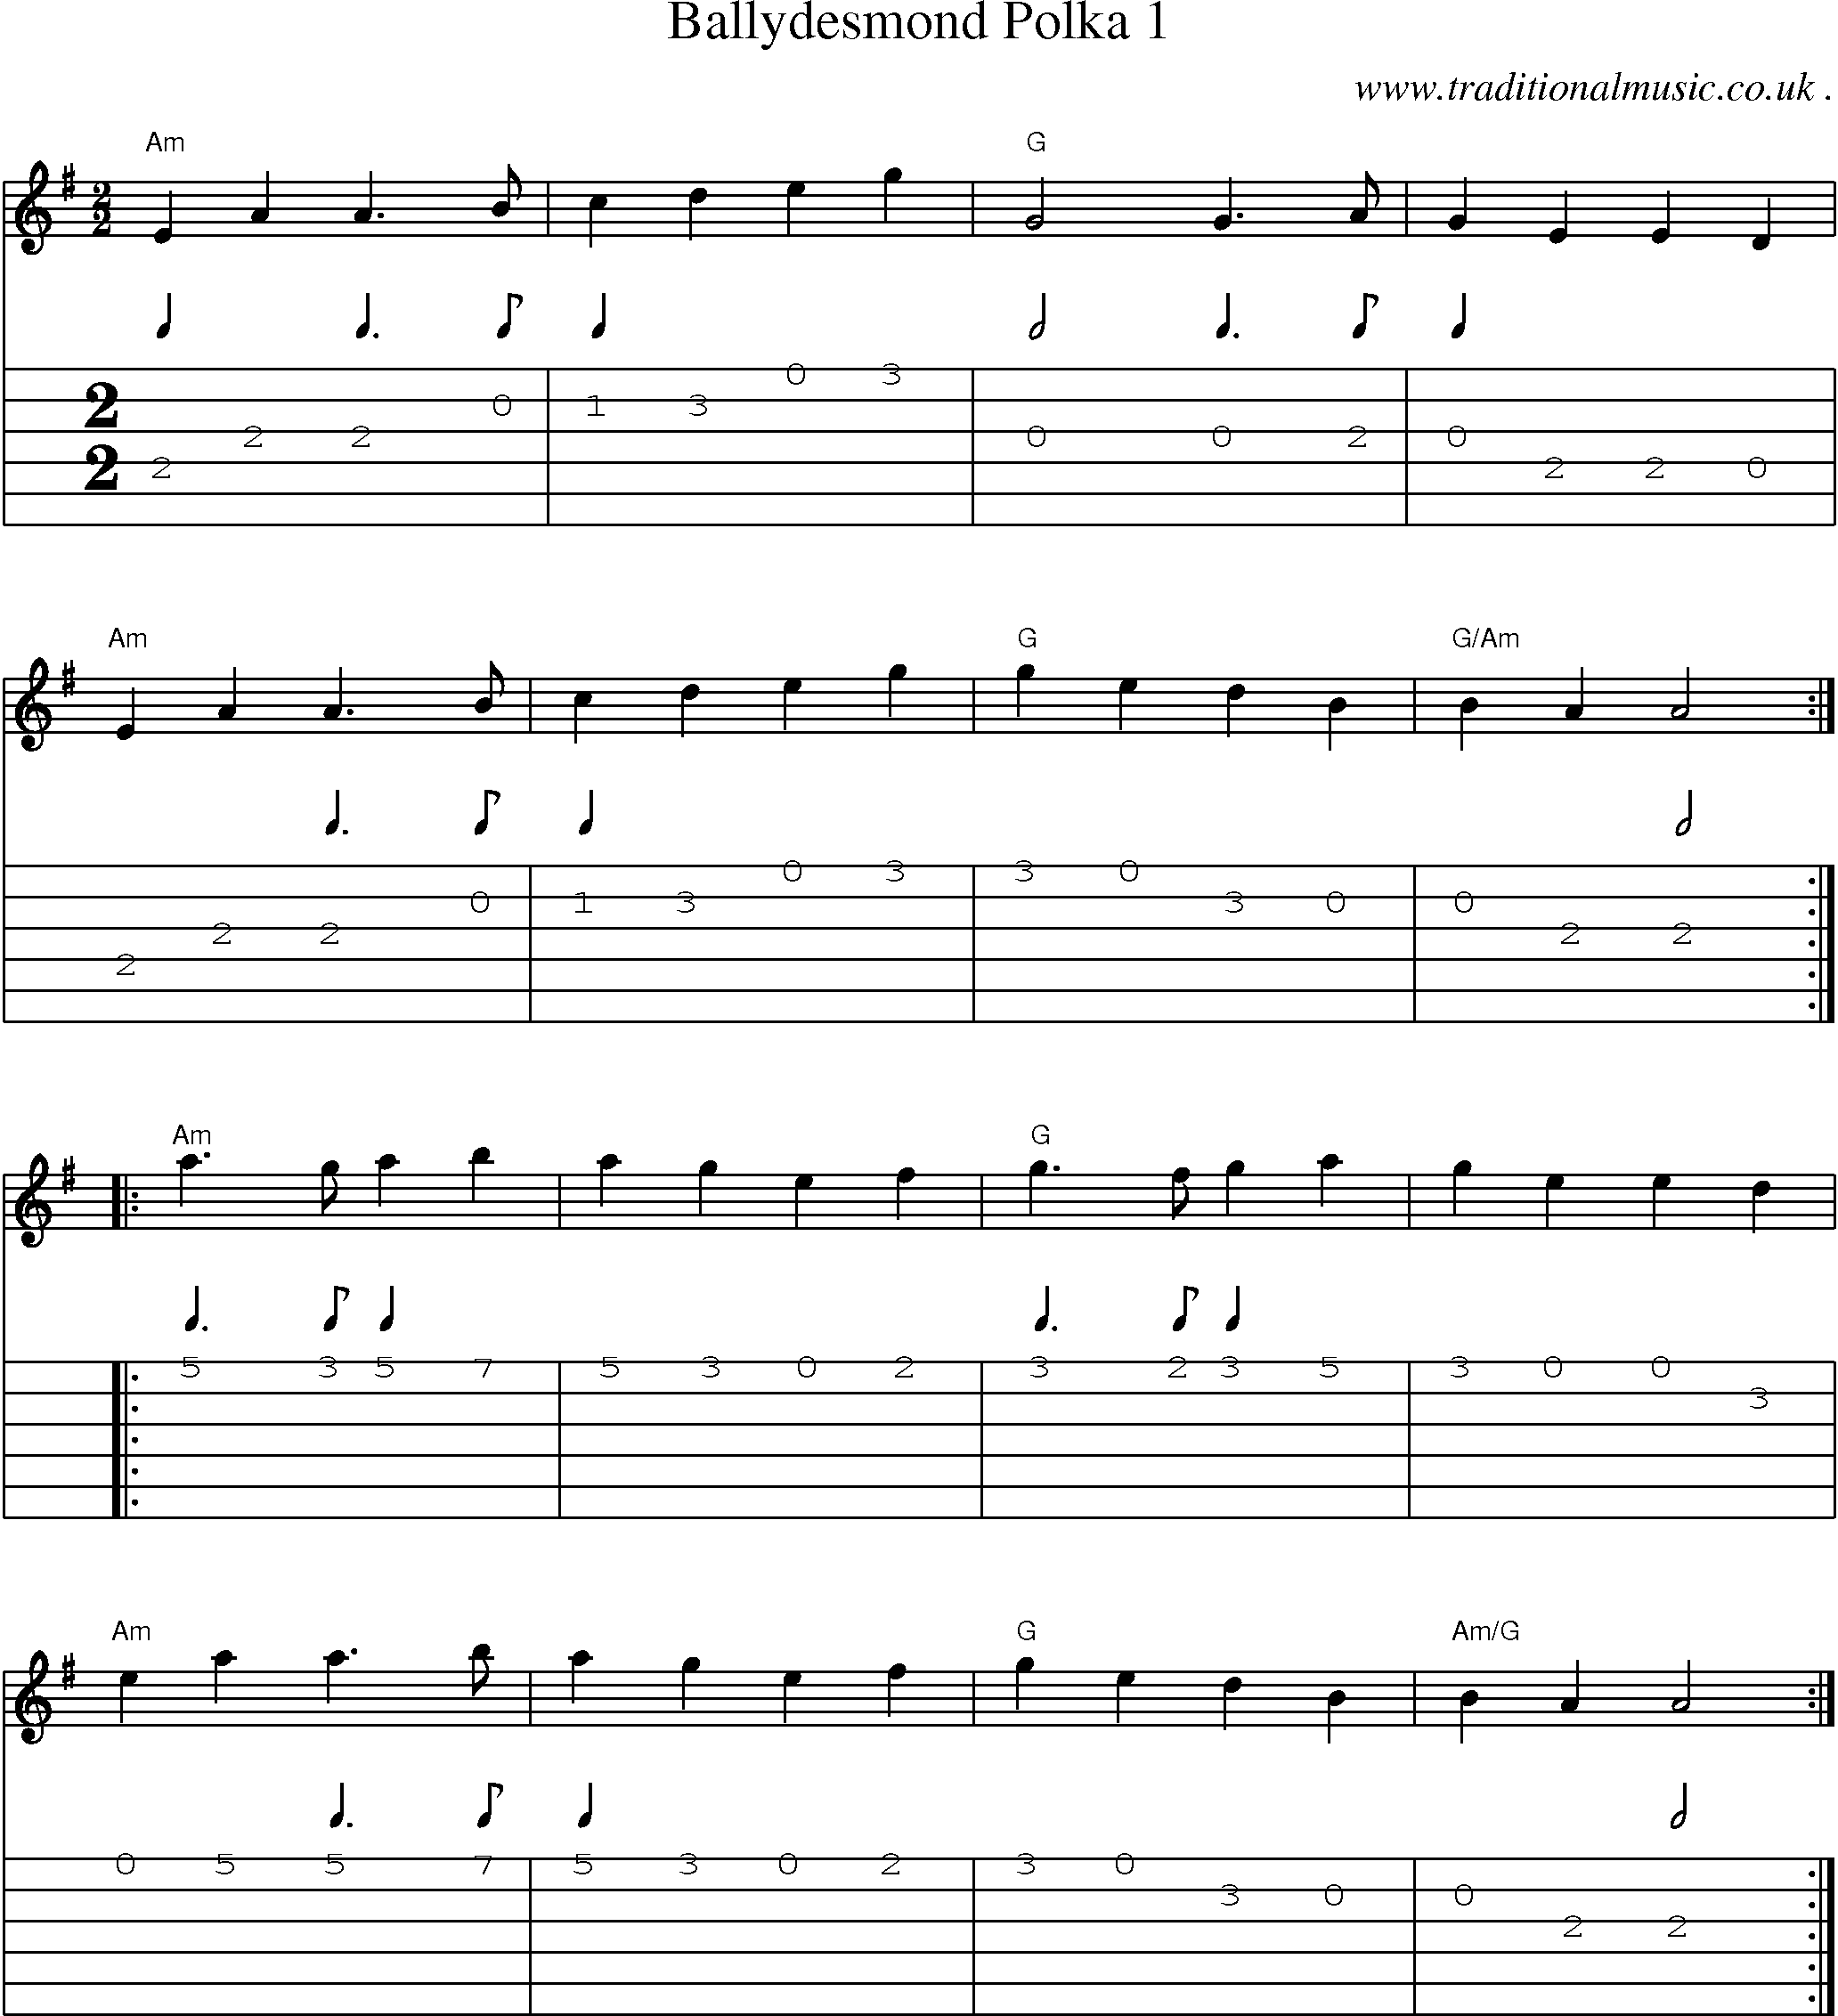 Music Score and Guitar Tabs for Ballydesmond Polka 1